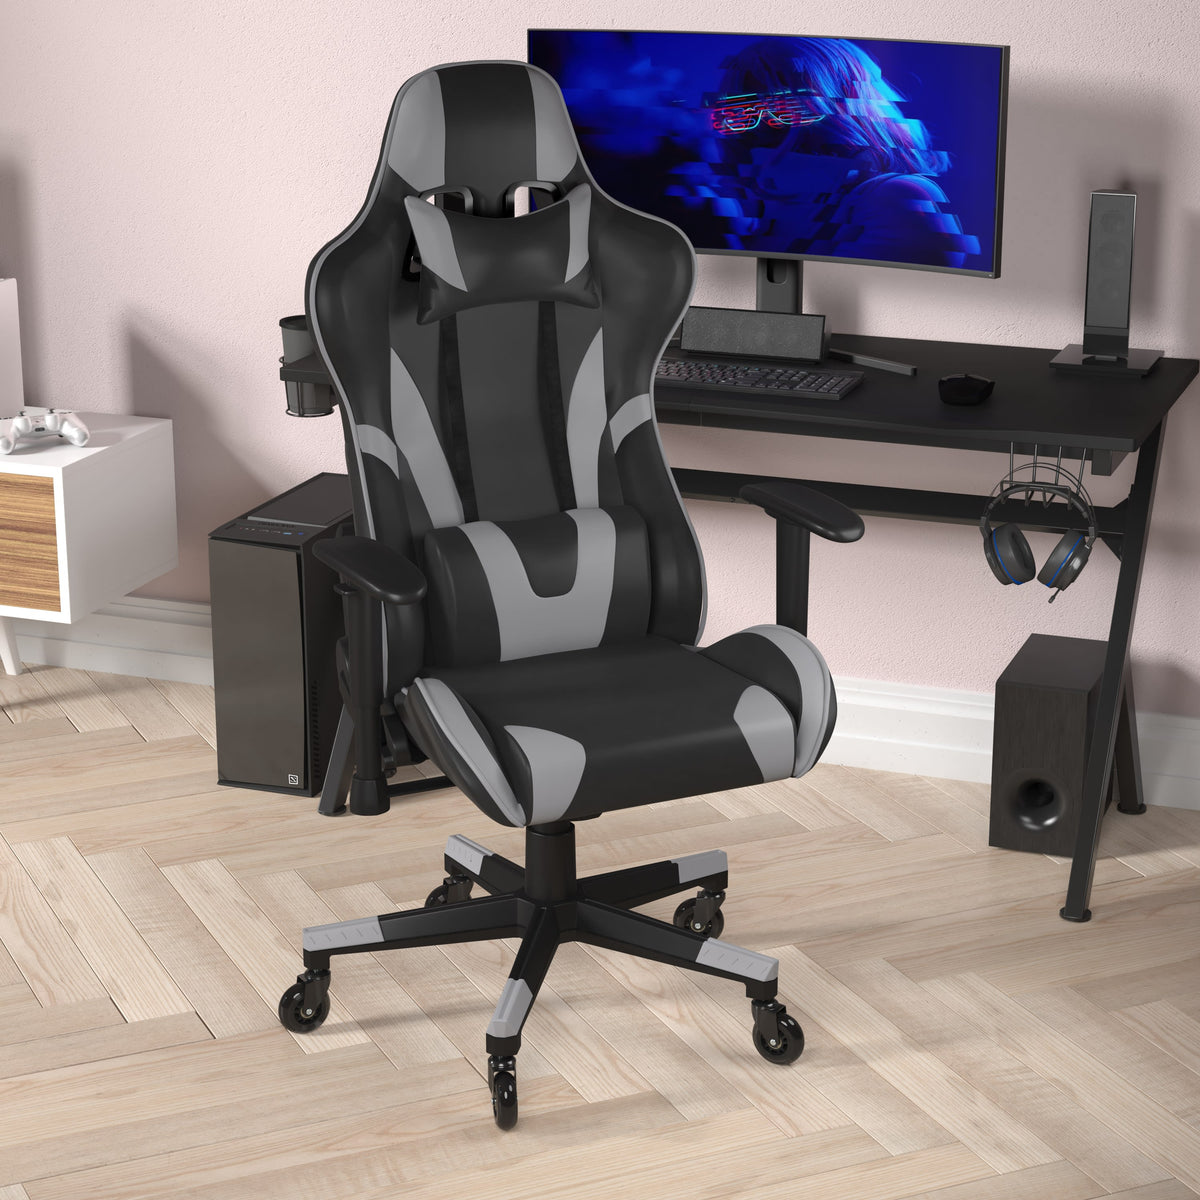 Gray |#| Office Gaming Chair with Roller Wheels & Reclining Back - Gray LeatherSoft